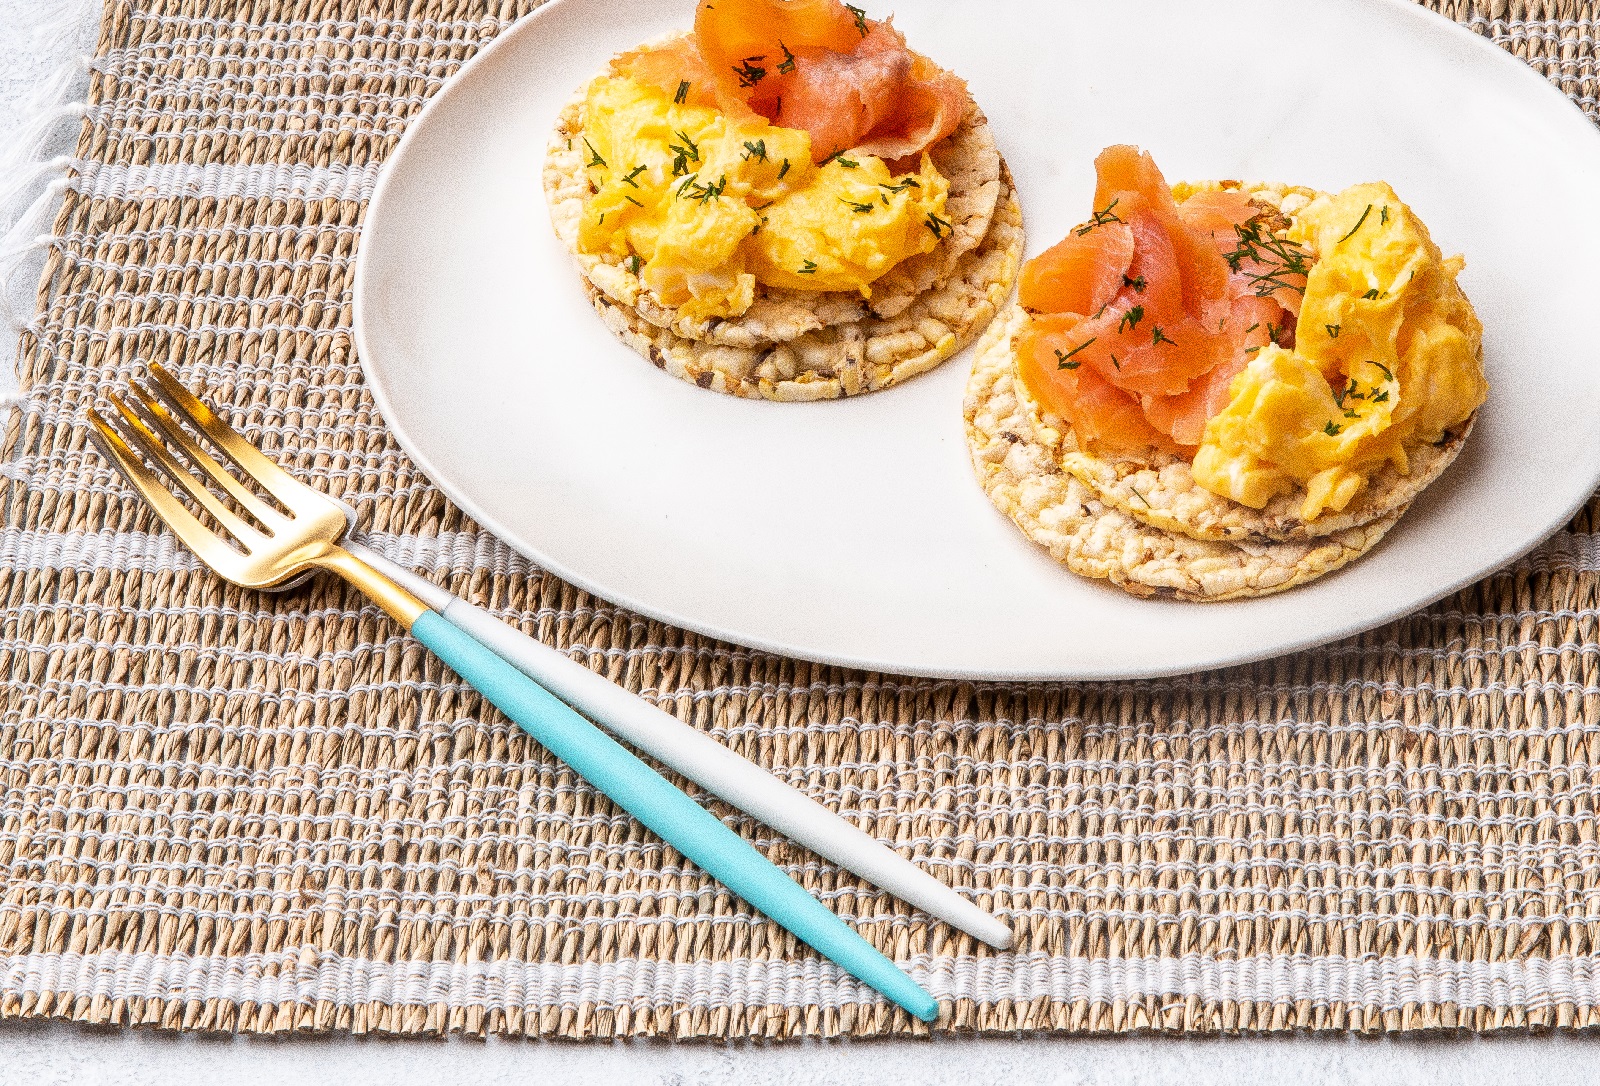 Scrambled Eggs, Smoked Salmon & Dill on Corn Thins slices for a gluten free breakfast